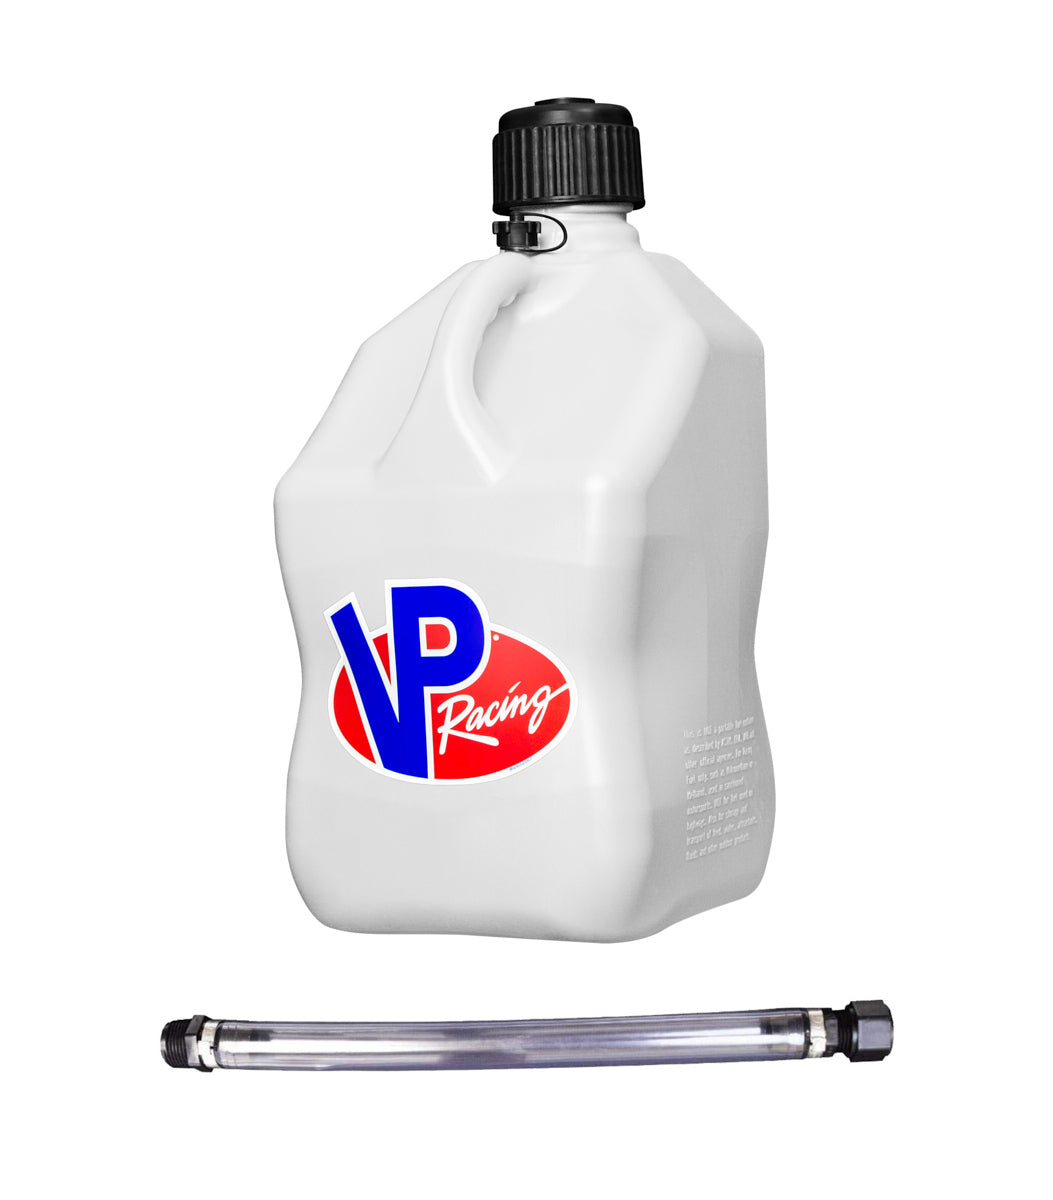 VP Racing 5.5-Gallon Motorsport Container - White Jug, Black Cap w/Filler Hose - Dirty Racing Products